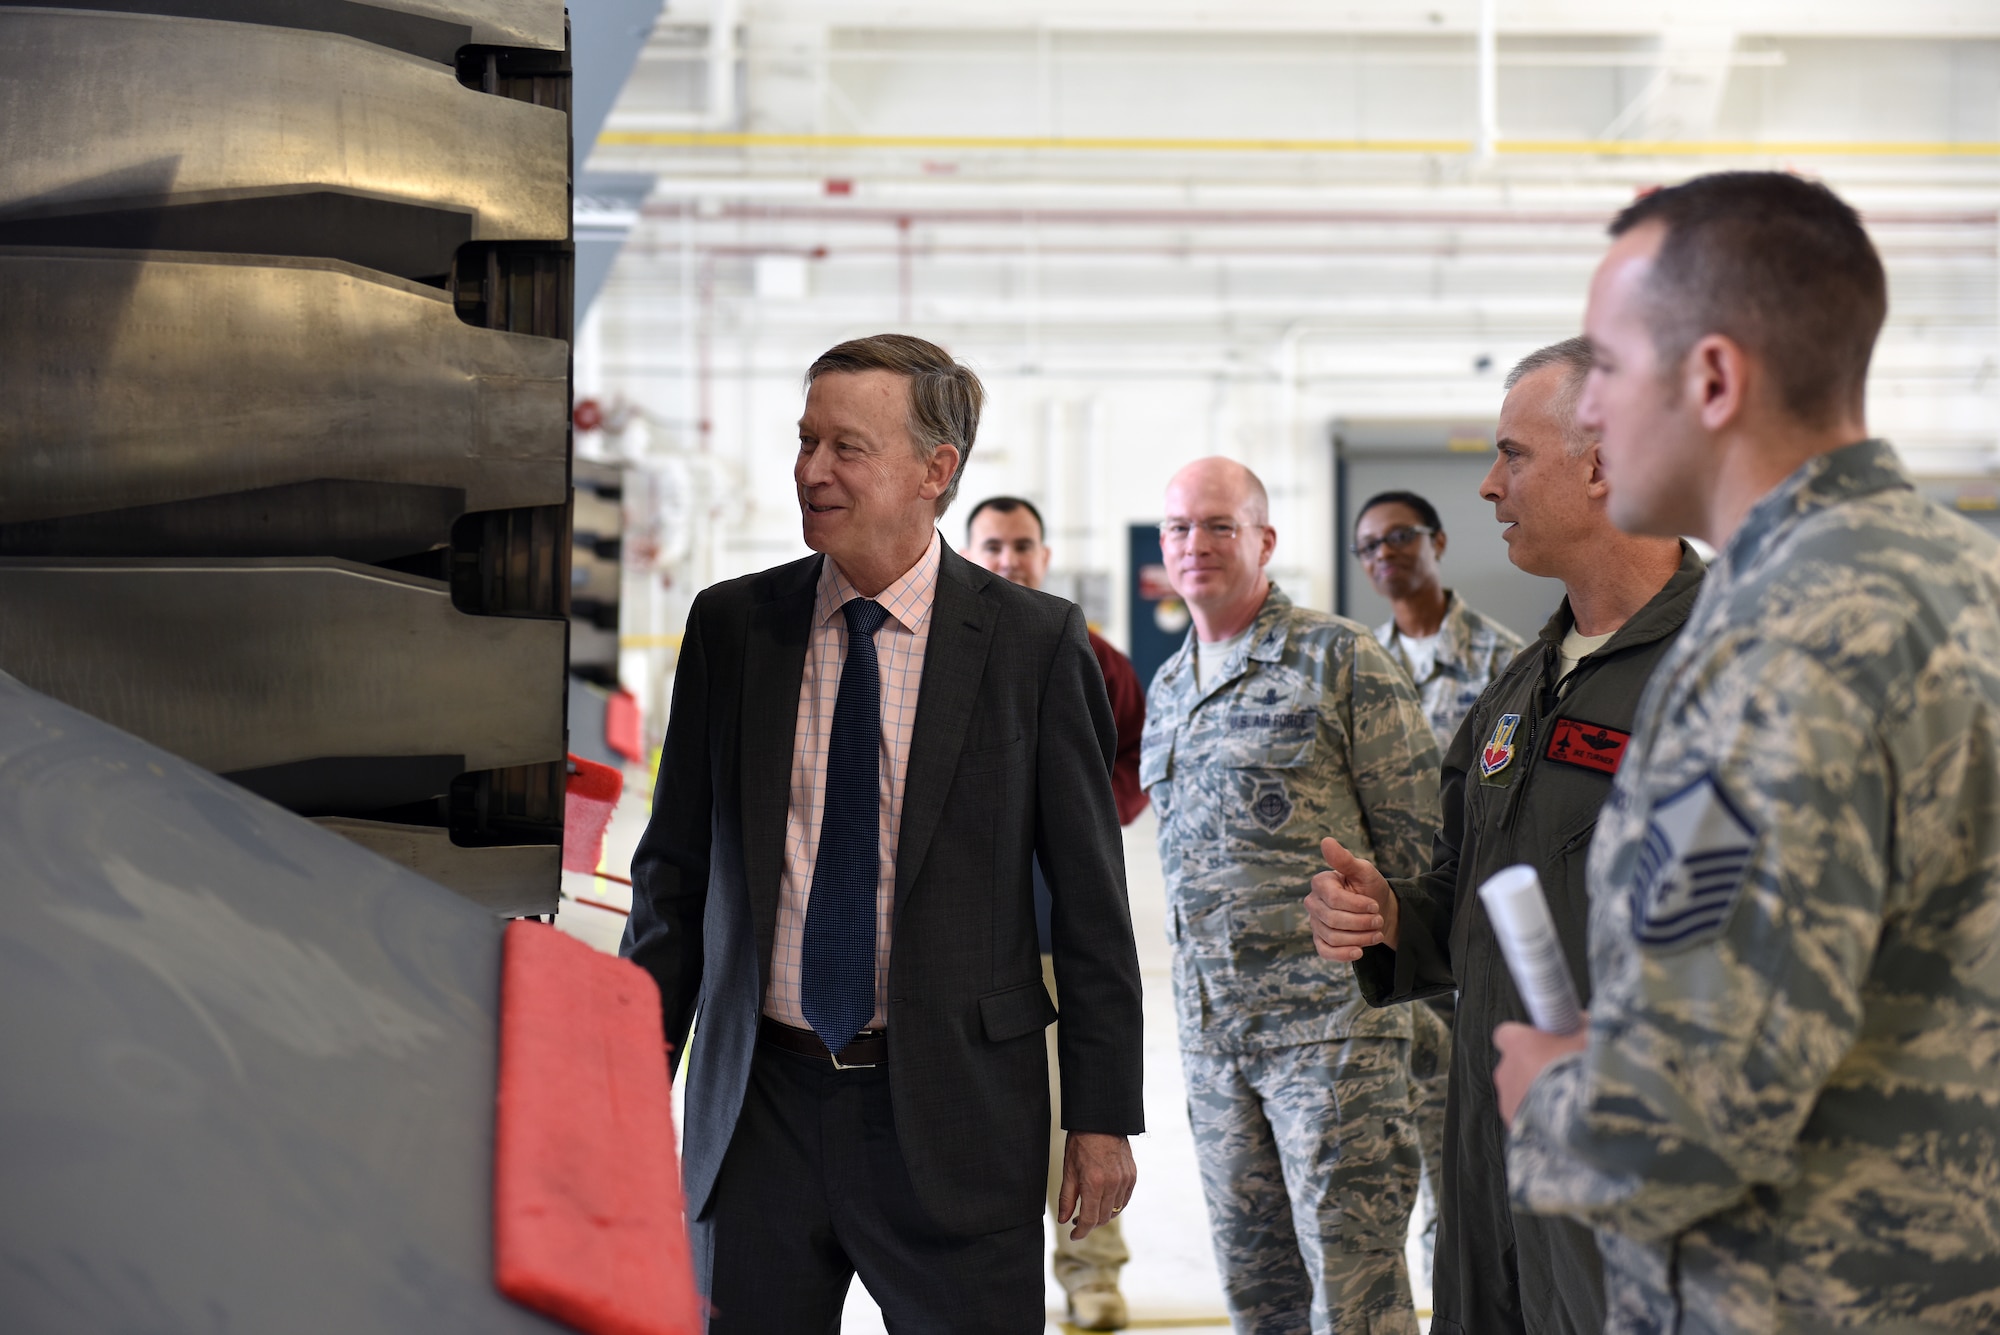 Gov. John Hickenlooper of Colorado, far left, receives a brief on the Colorado Air National Guard’s F-16 Falcon’s mission capabilities from Col. Brian Turner, second from right, 140th Wing commander, at Buckley Air Force Base, Colorado, July 17, 2018.